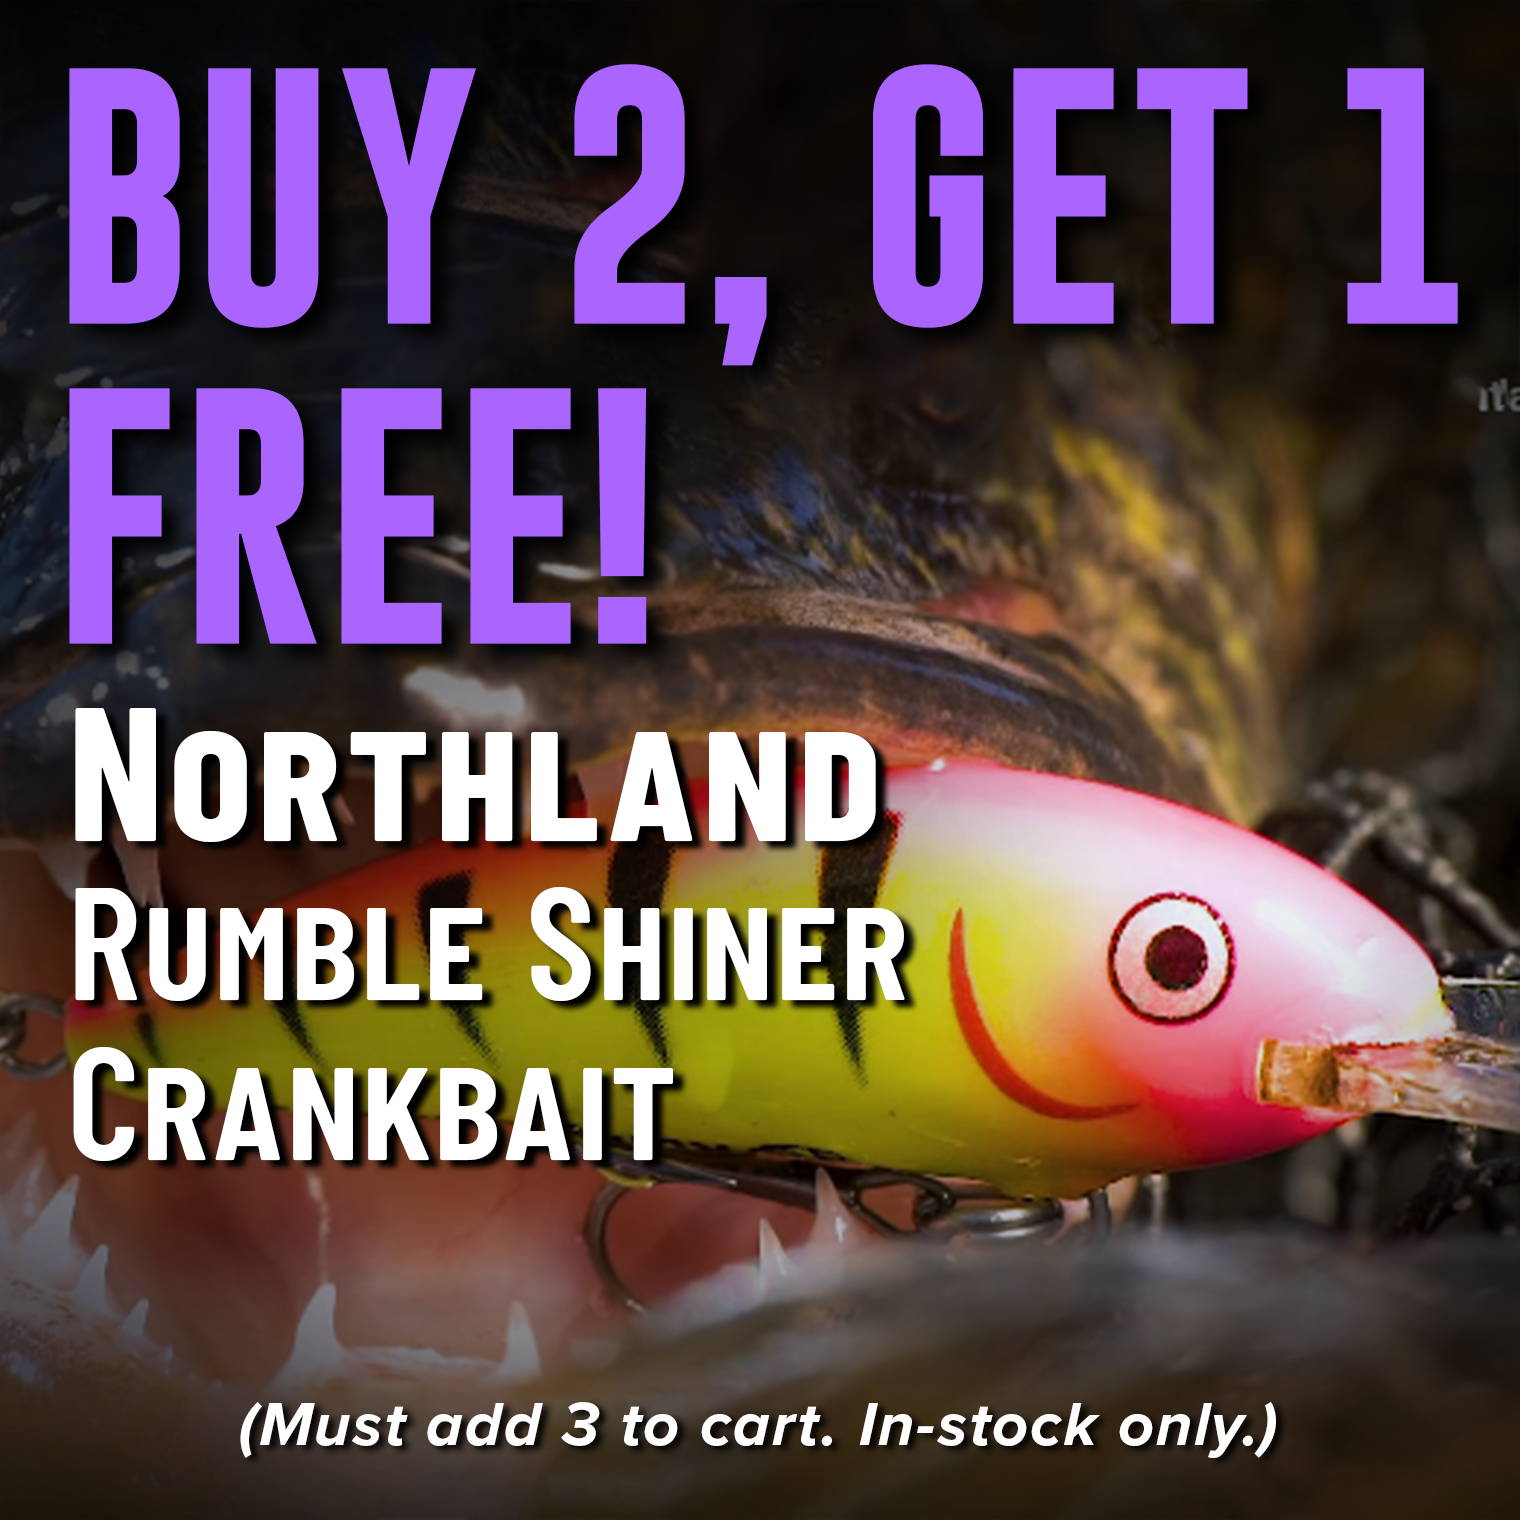 Buy 2, Get 1 Free! Northland Rumble Shiner Crankbait (Must add 3 to cart. In-stock only.)